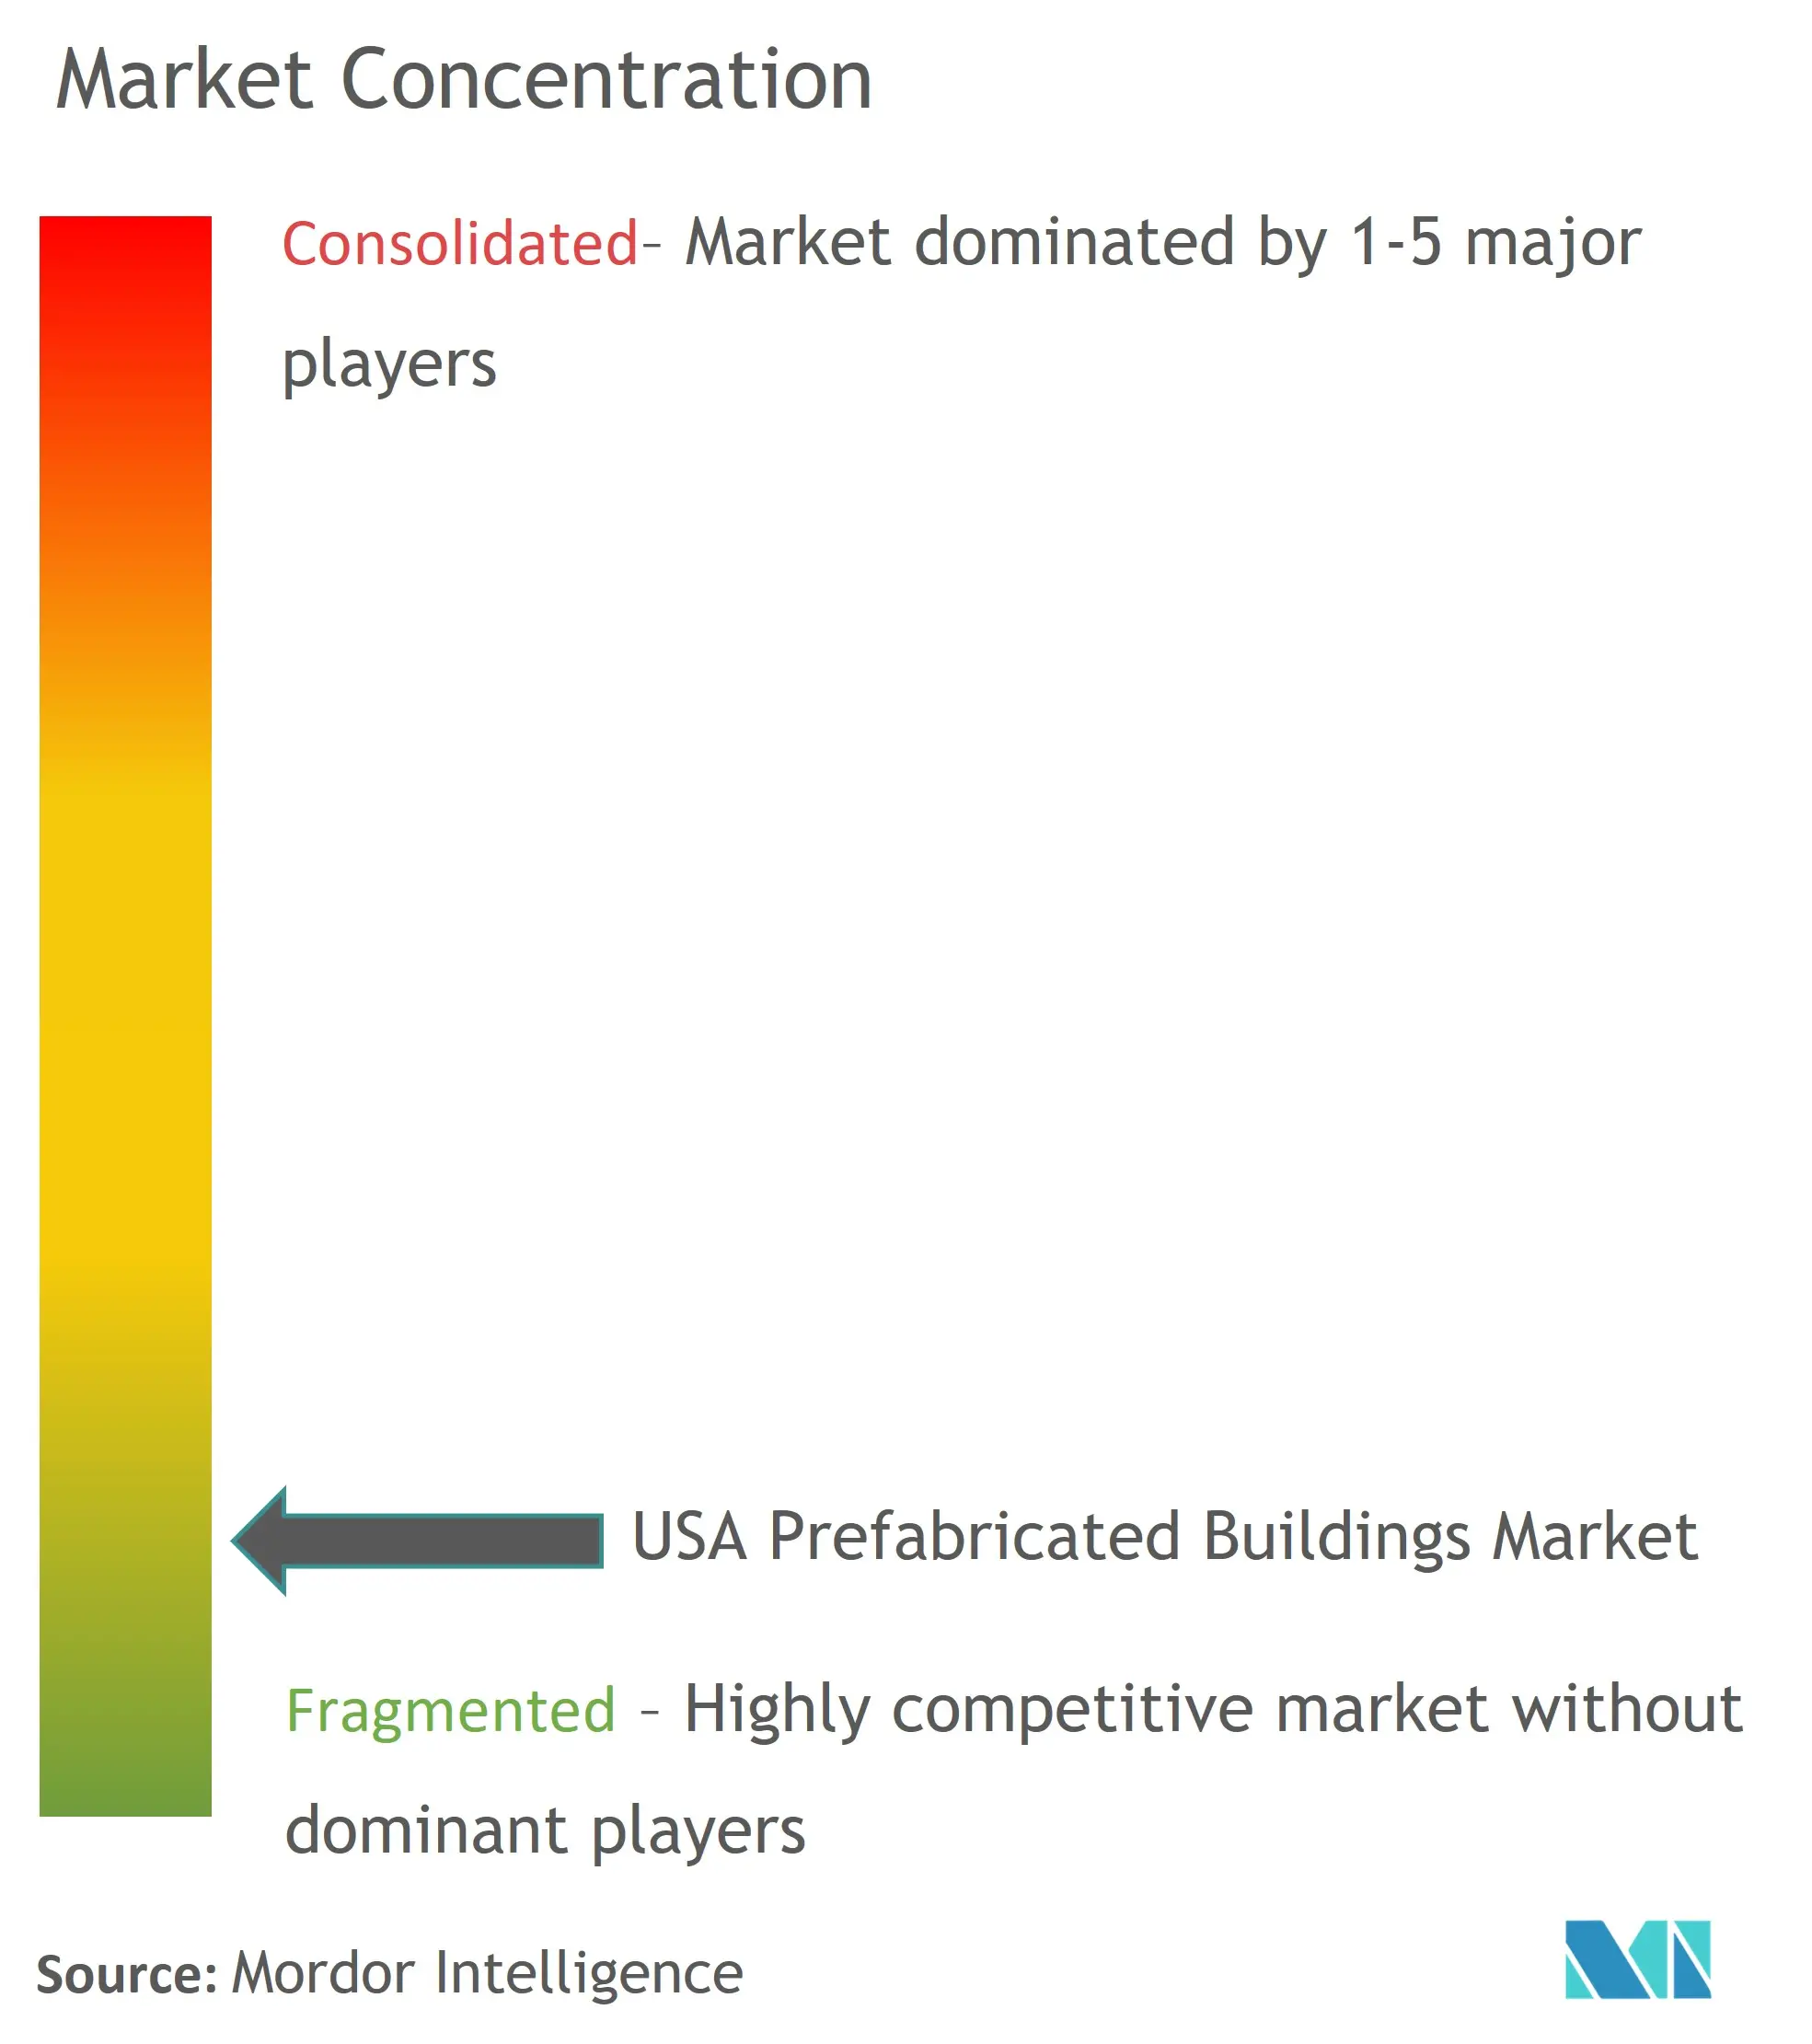 United States Prefabricated Buildings Market Concentration